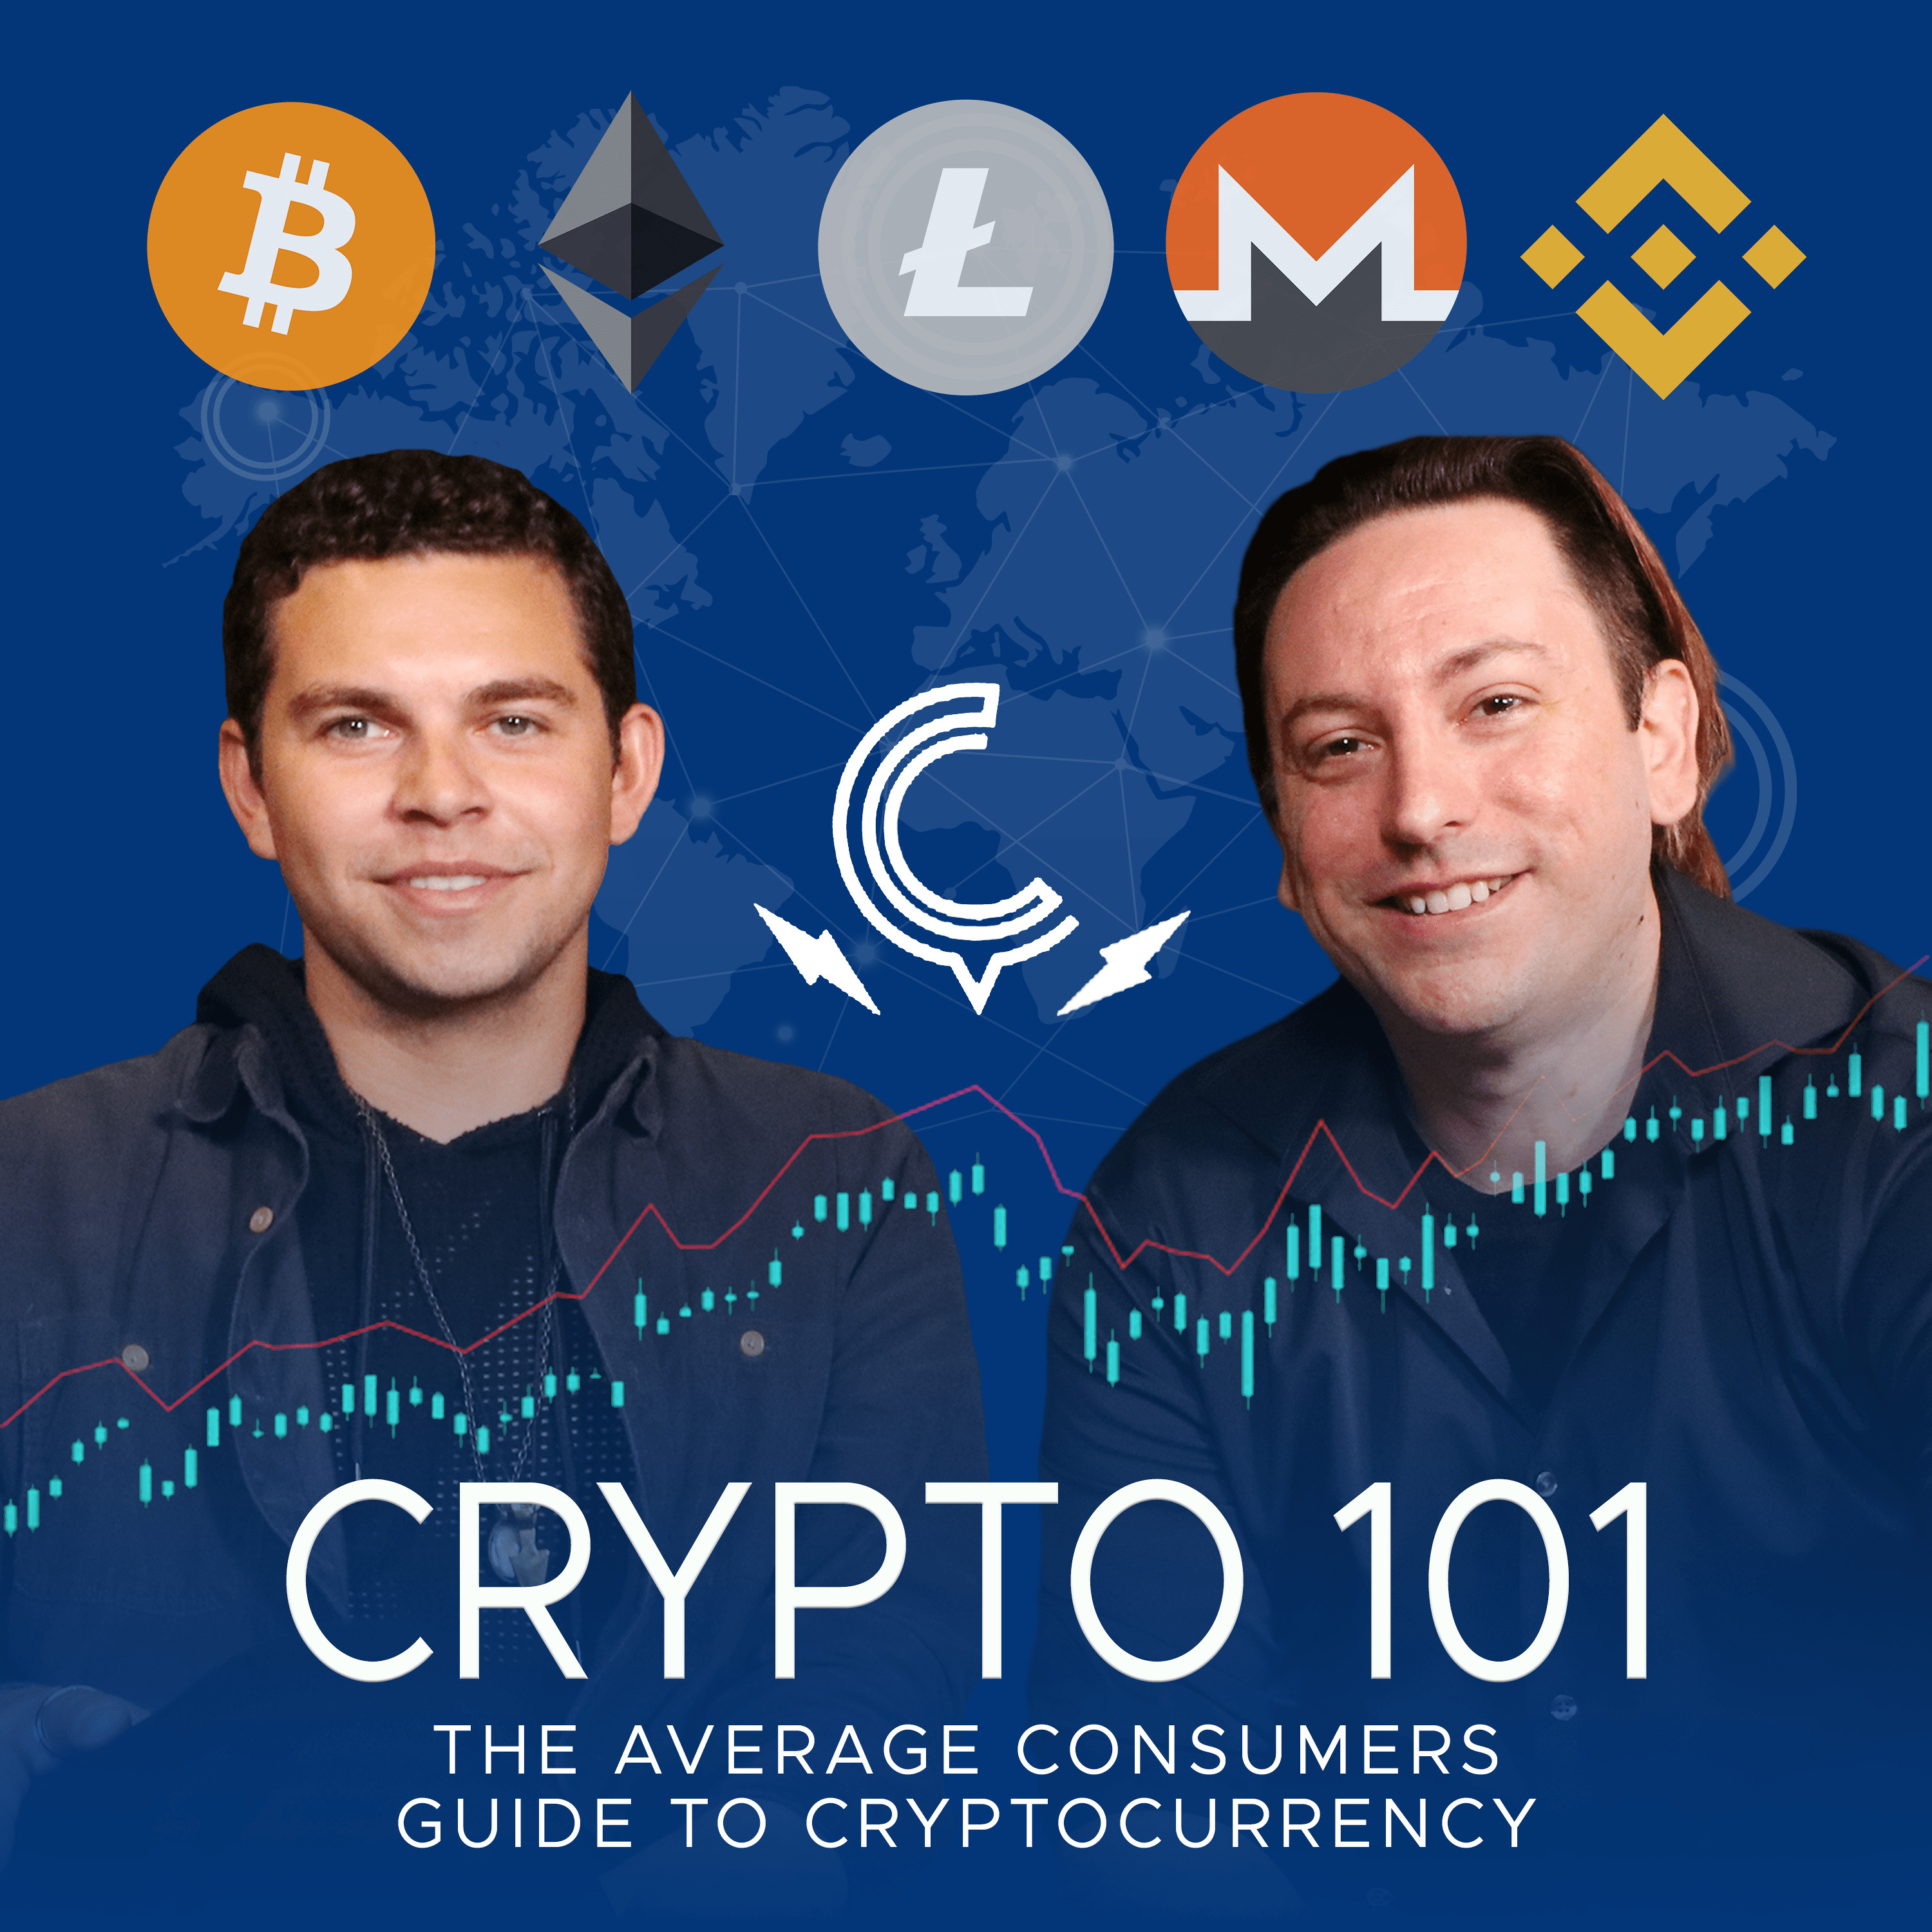 Ep. 151 - LISK 101 w/ Max Kordex CEO/Founder